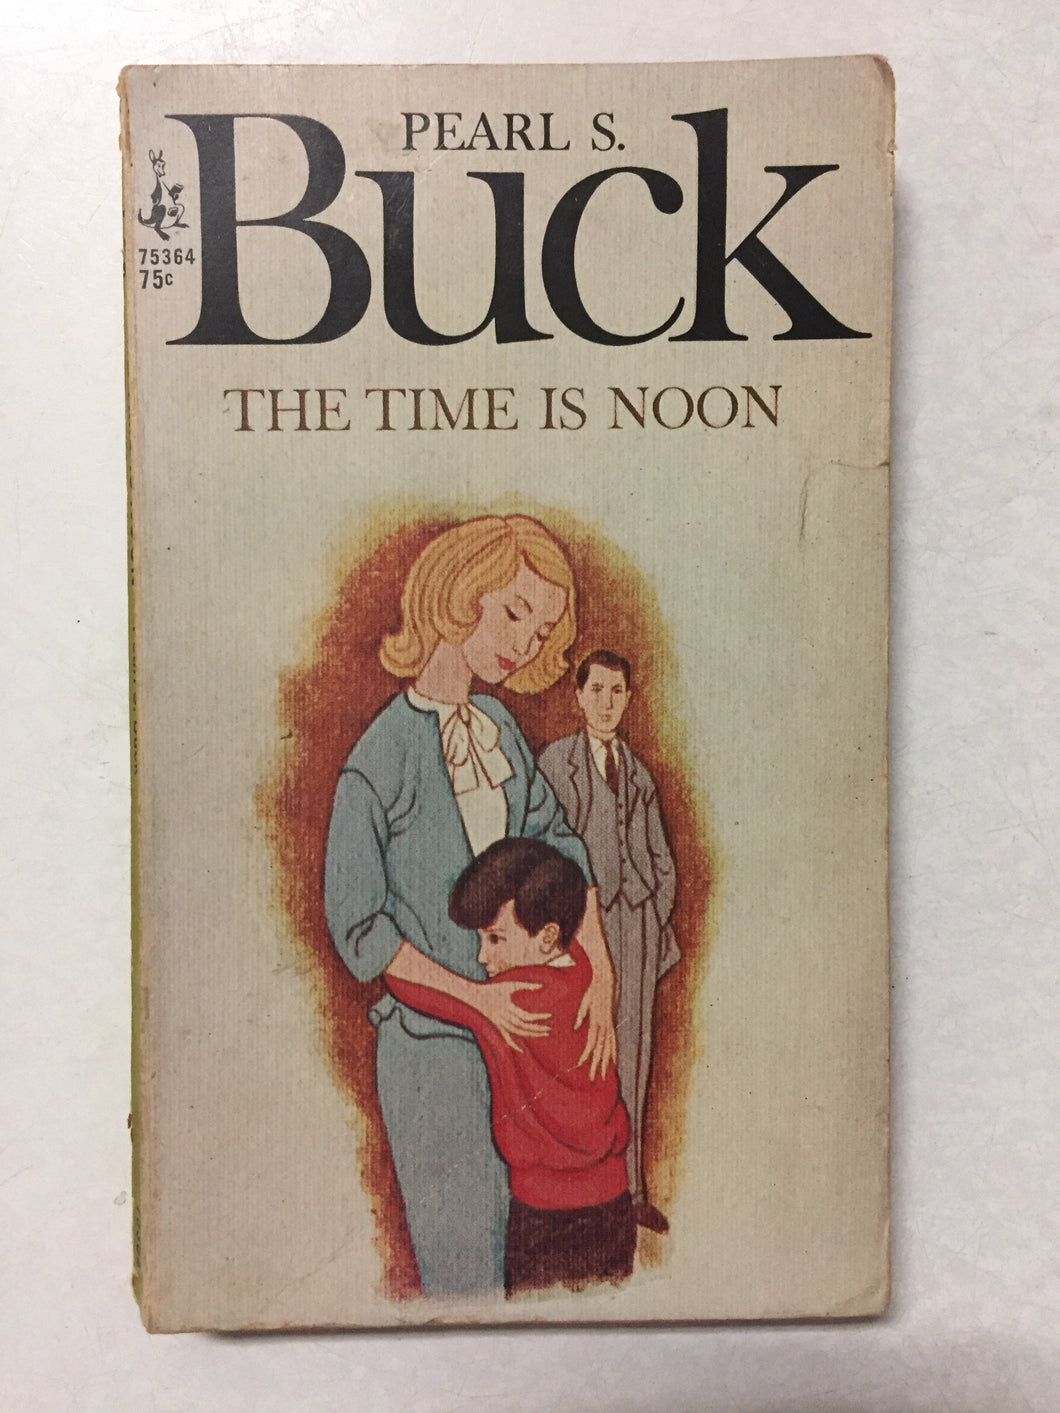 The Time is Noon - Slickcatbooks